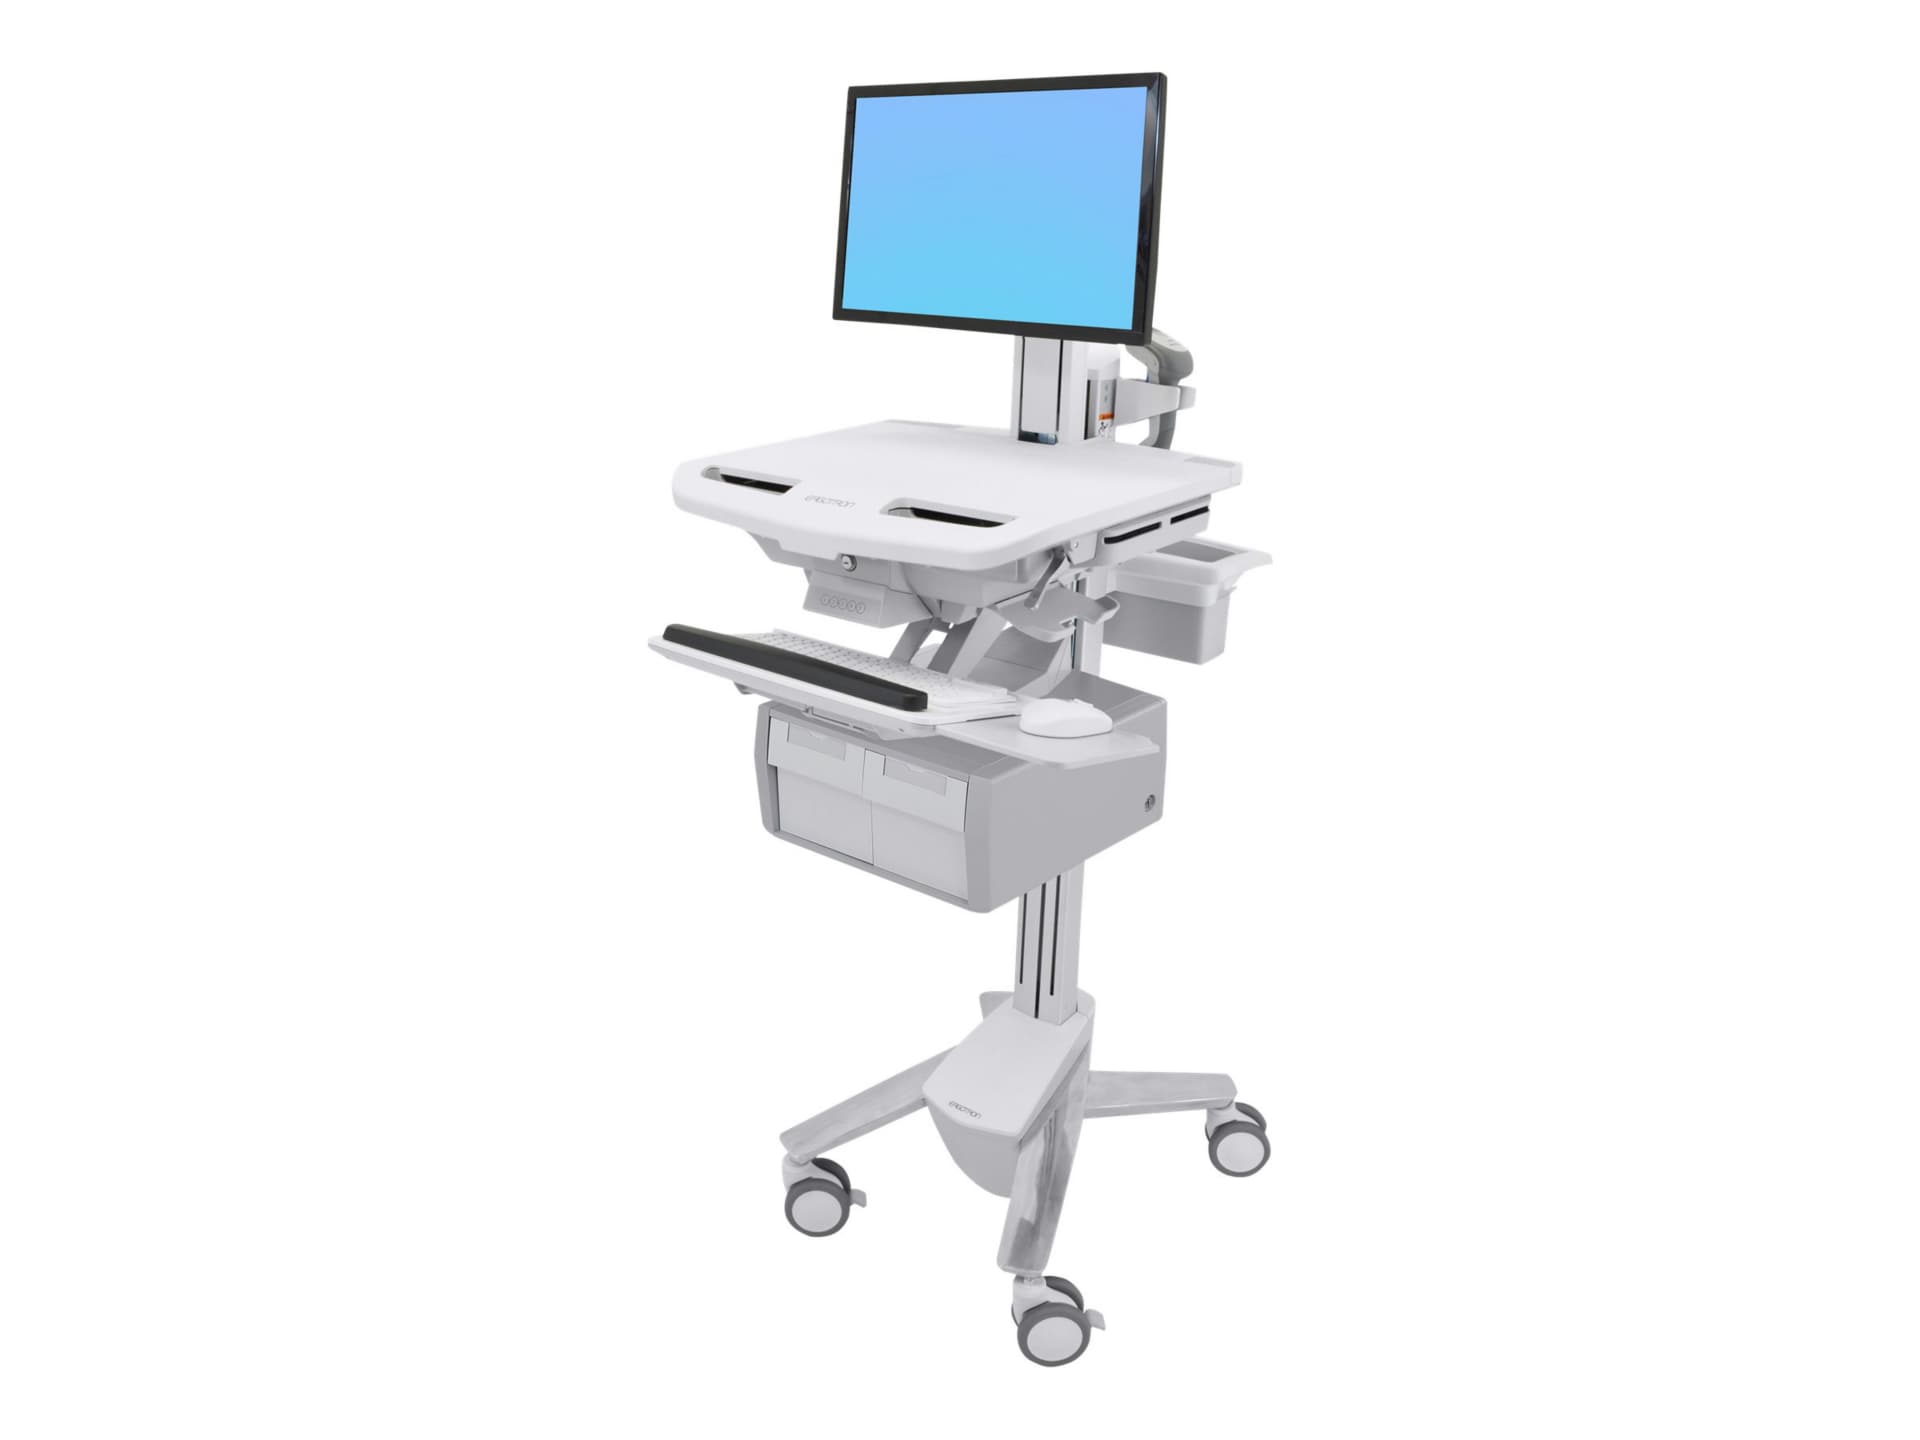 Ergotron StyleView cart - open architecture - for LCD display / keyboard / mouse / barcode scanner / CPU